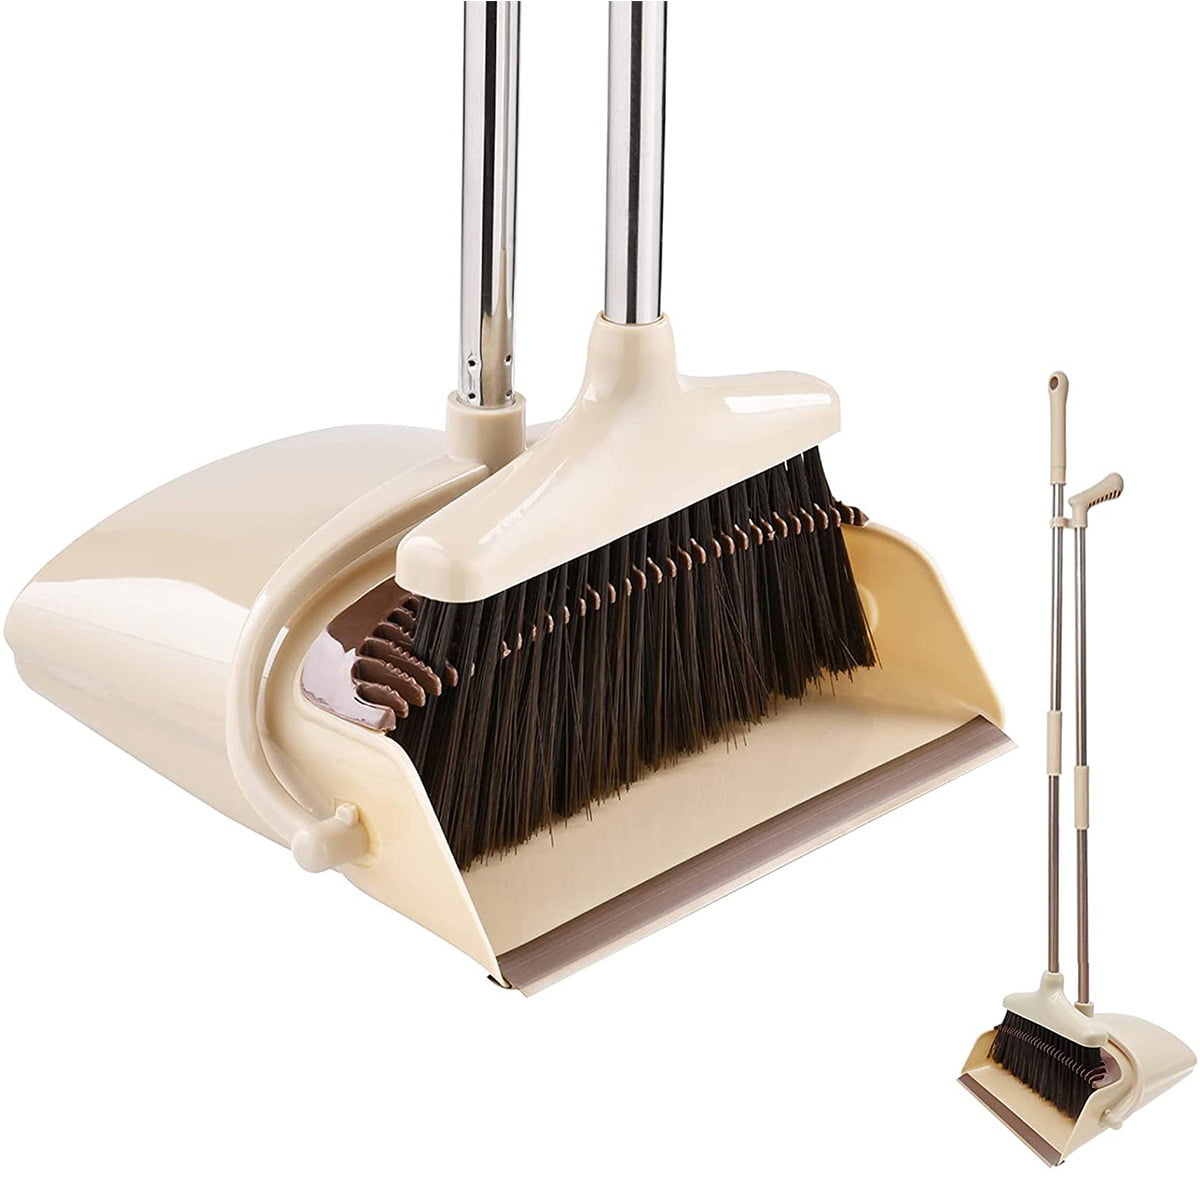 Broom and Dustpan Set,Long Handle Upright Standing Thick Rod Plastic Broom Floor Cleaning Dustpan with Longer Comb Teeth,Enlarged Broom Head and Deodorant Box Design 